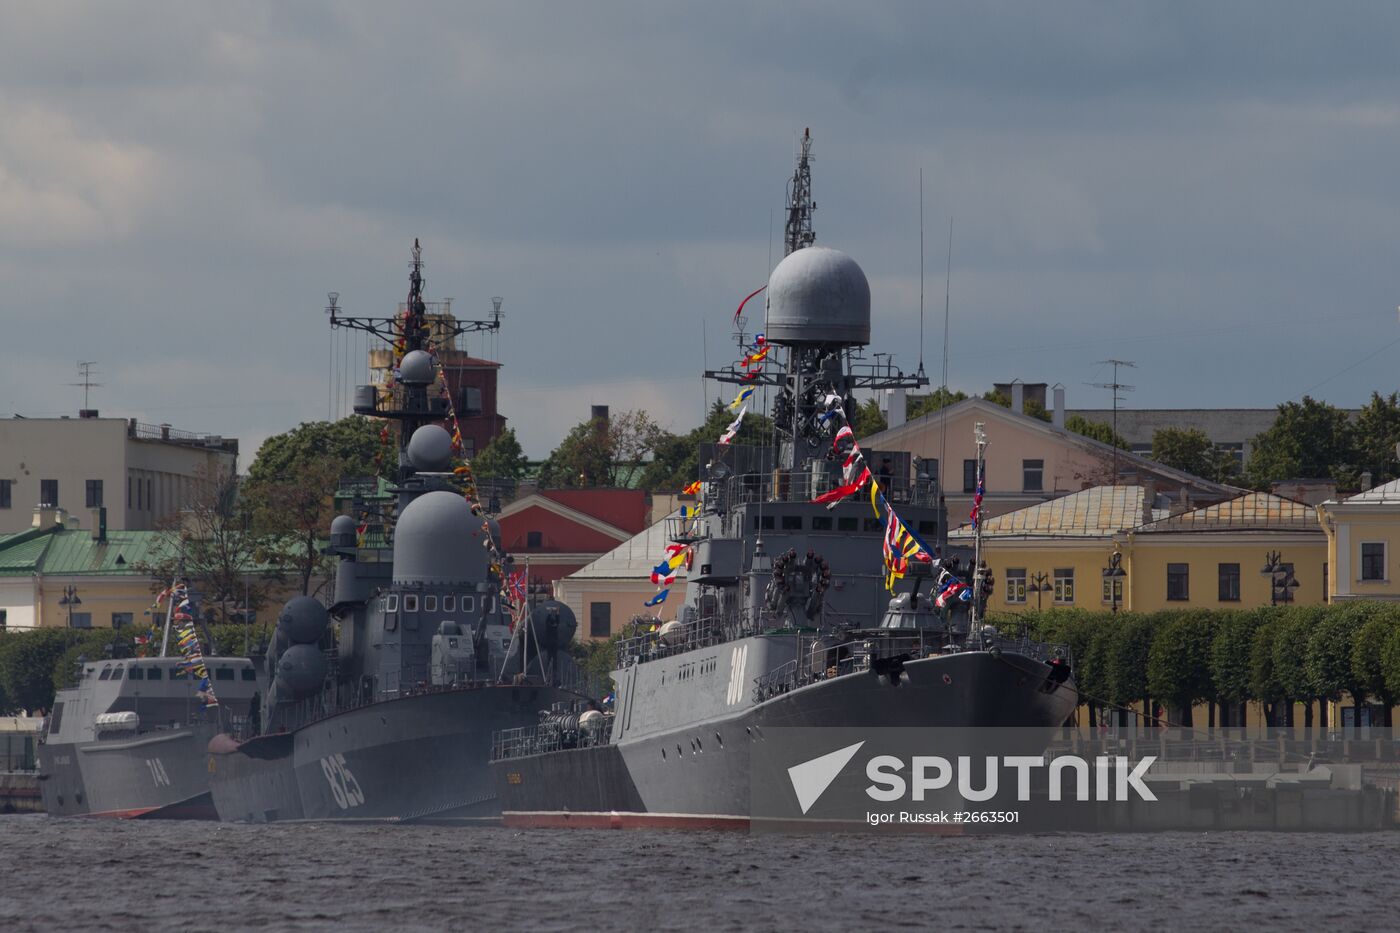 Rehearsal for Navy Day Parade in St. Petersburg